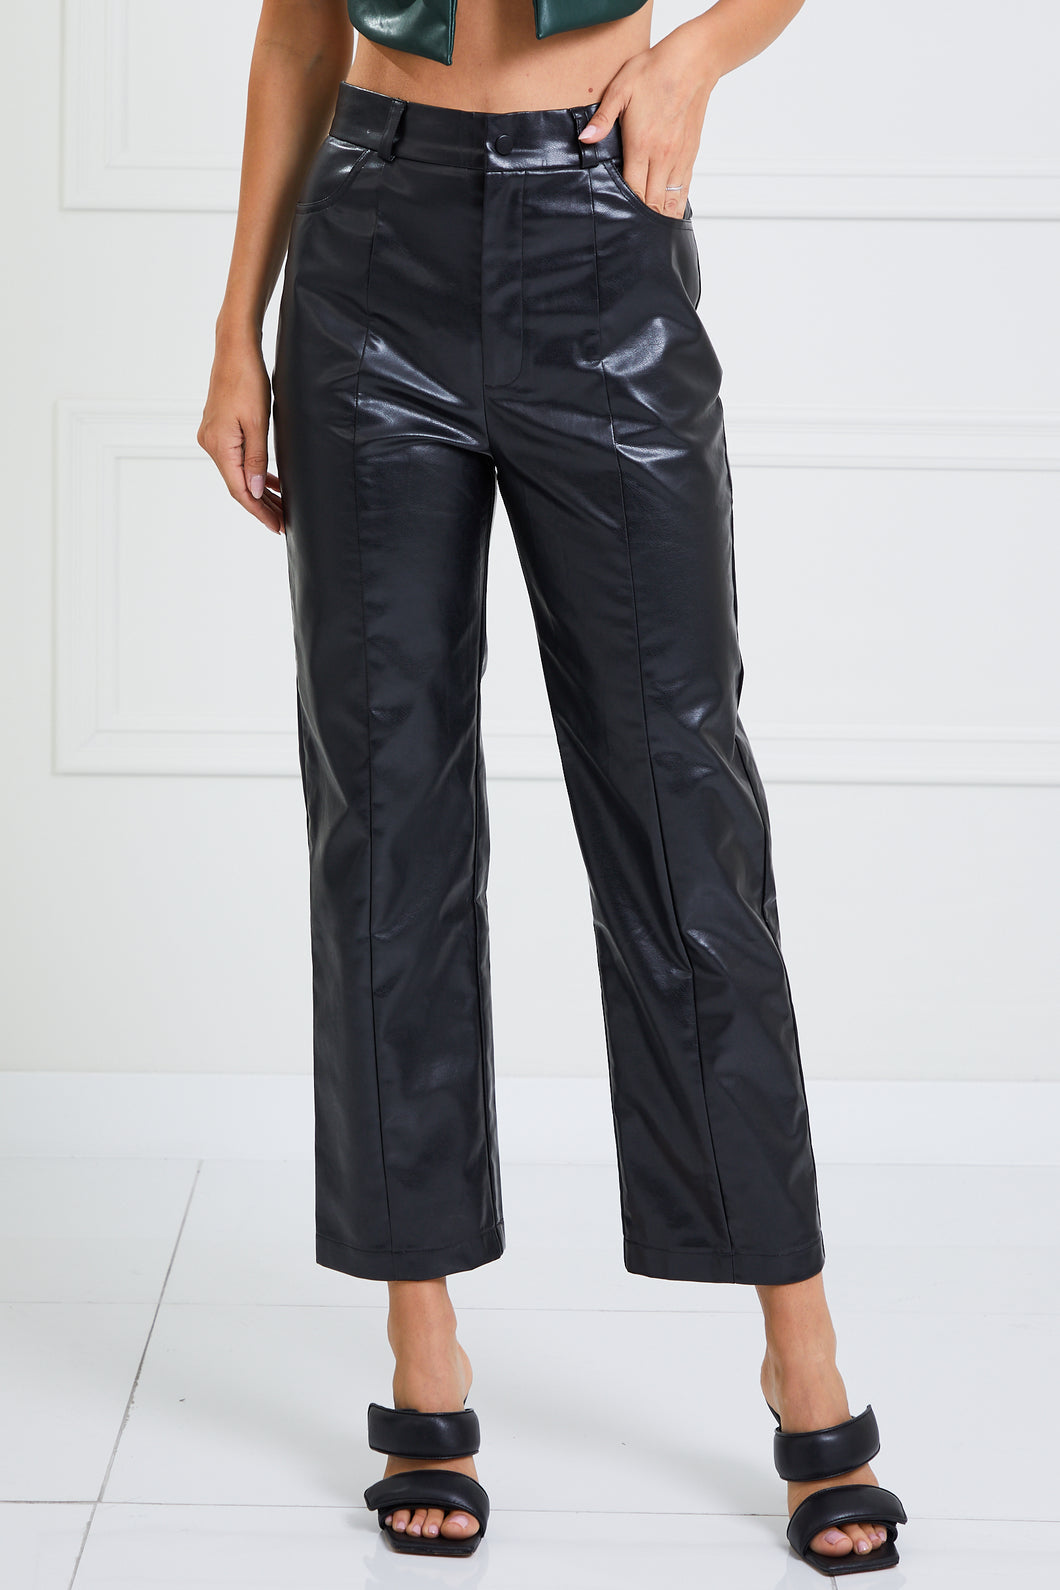 Black Leather Cropped Pant